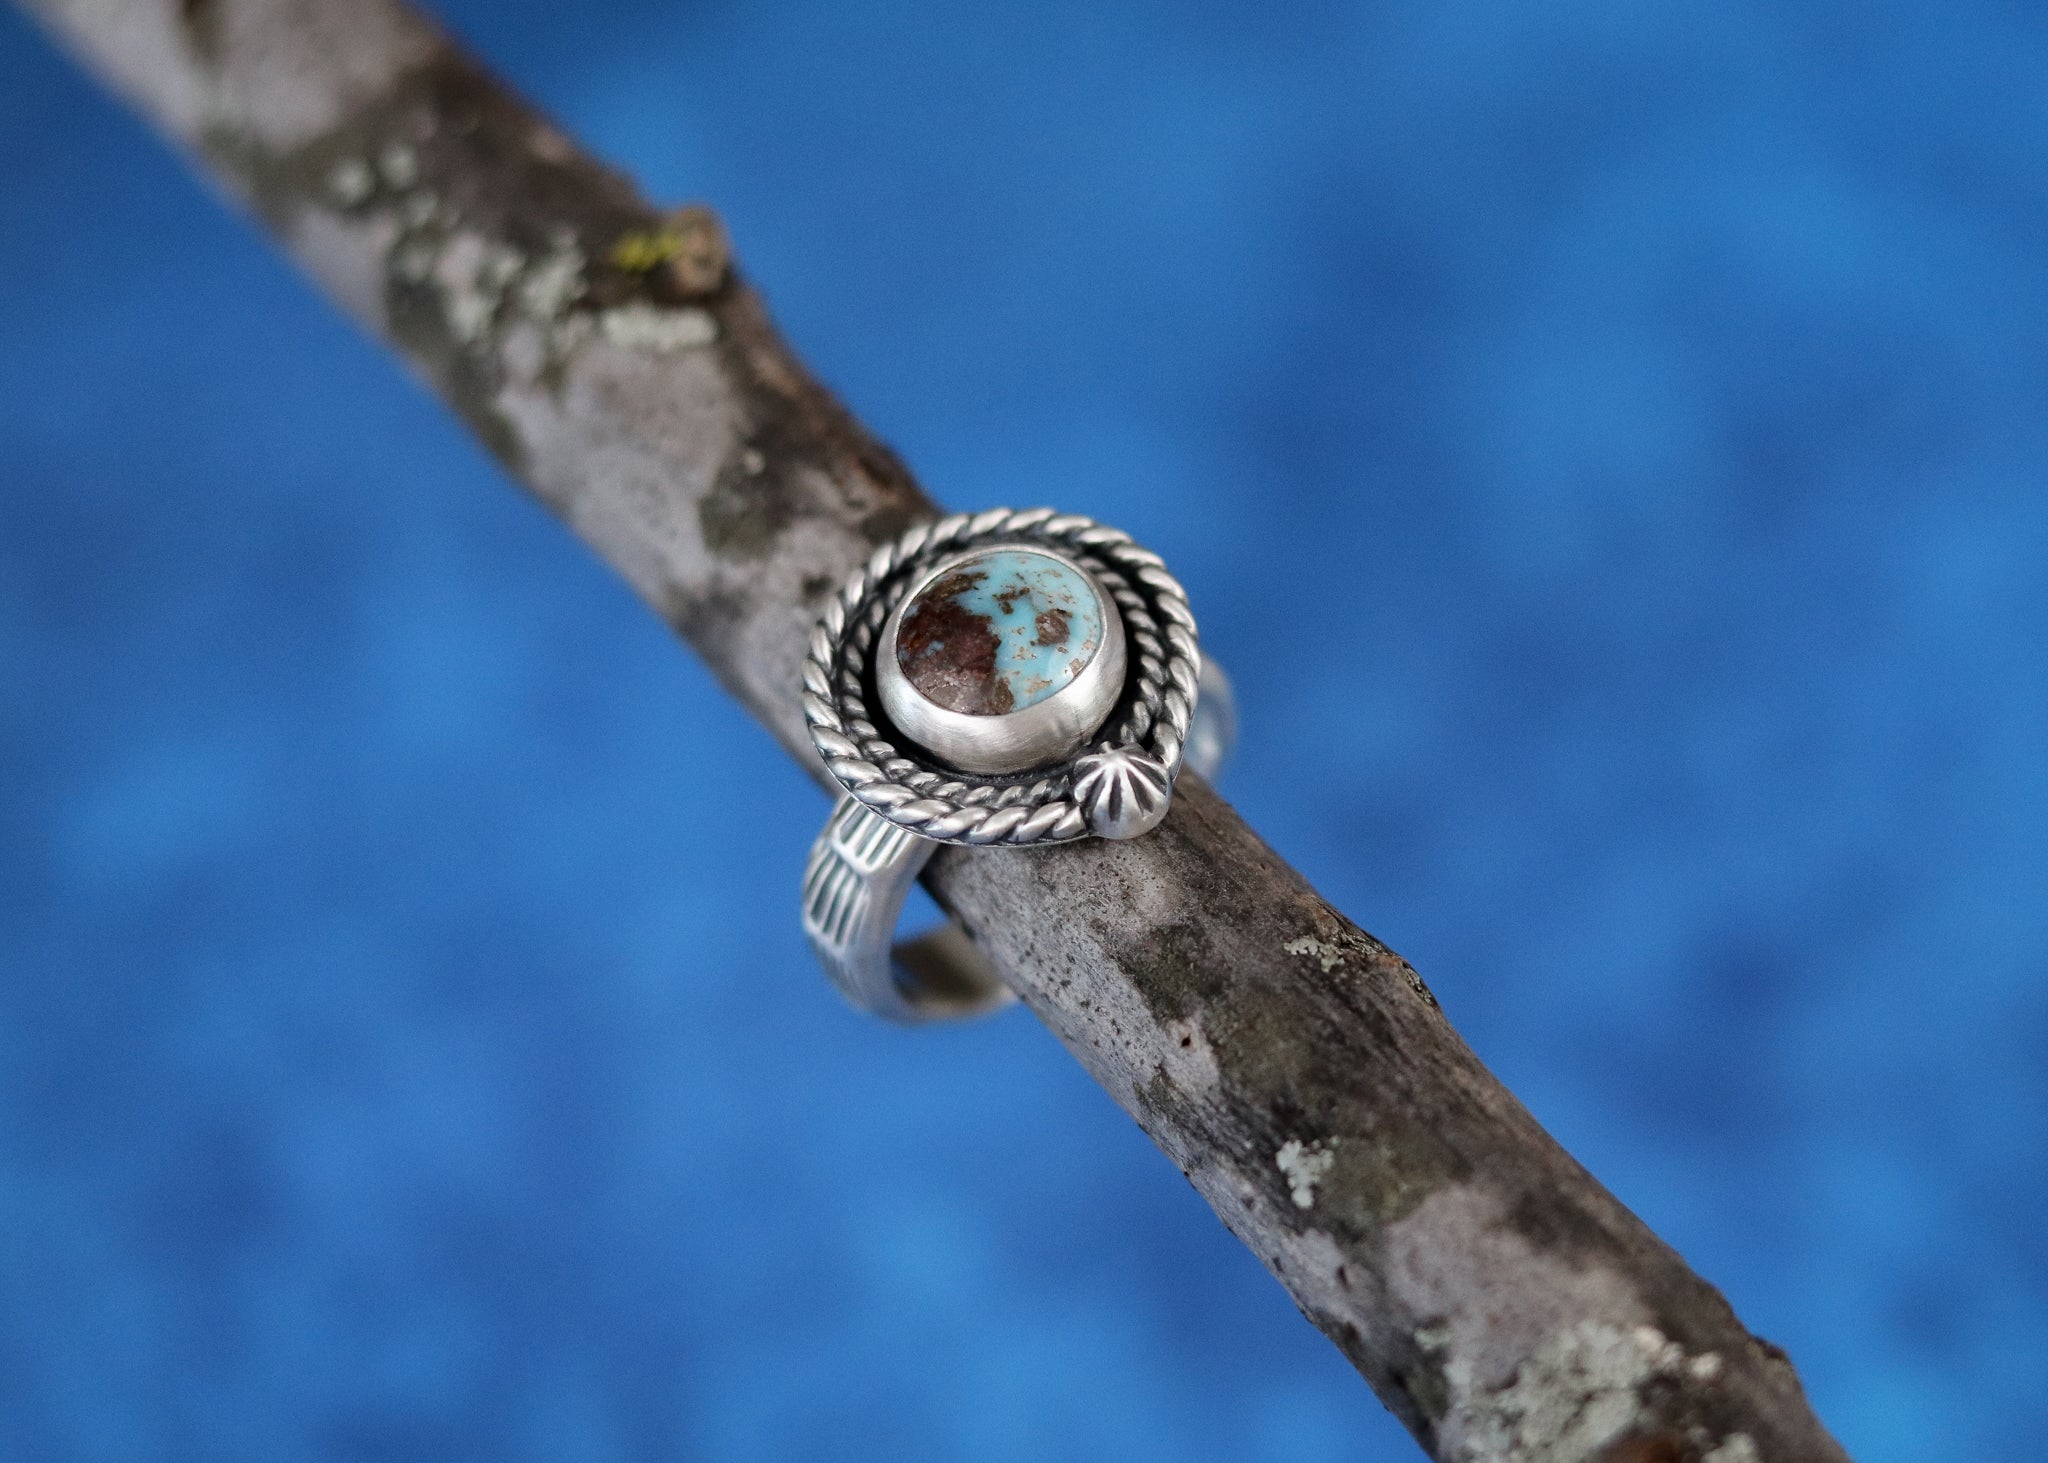 Orb Ring - Nevada Turquoise - Size 10